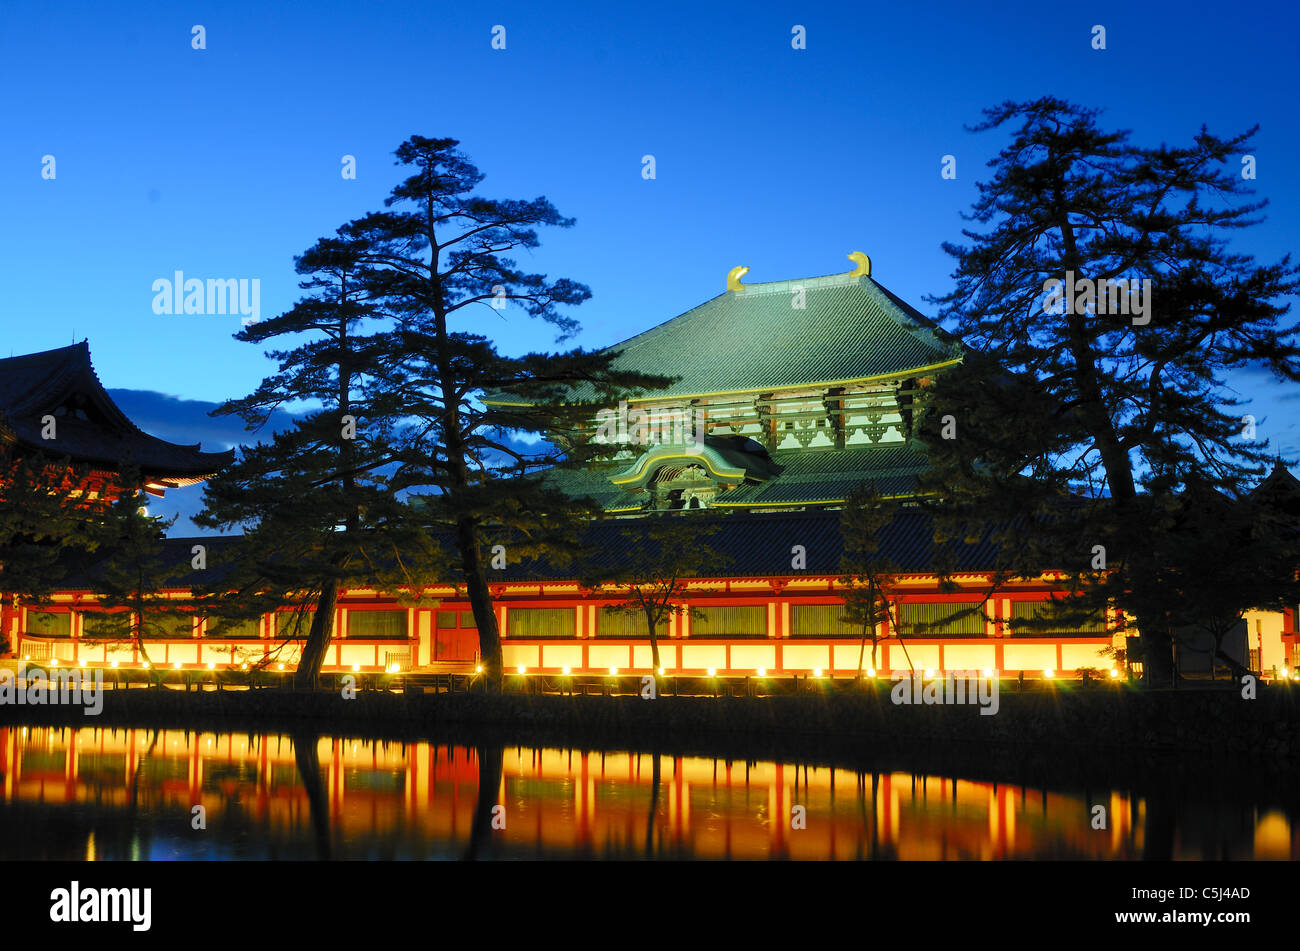 Exterior of Todaiji, the world's largest wooden building and a UNESCO World Heritage Site in Nara, Japan. Stock Photo